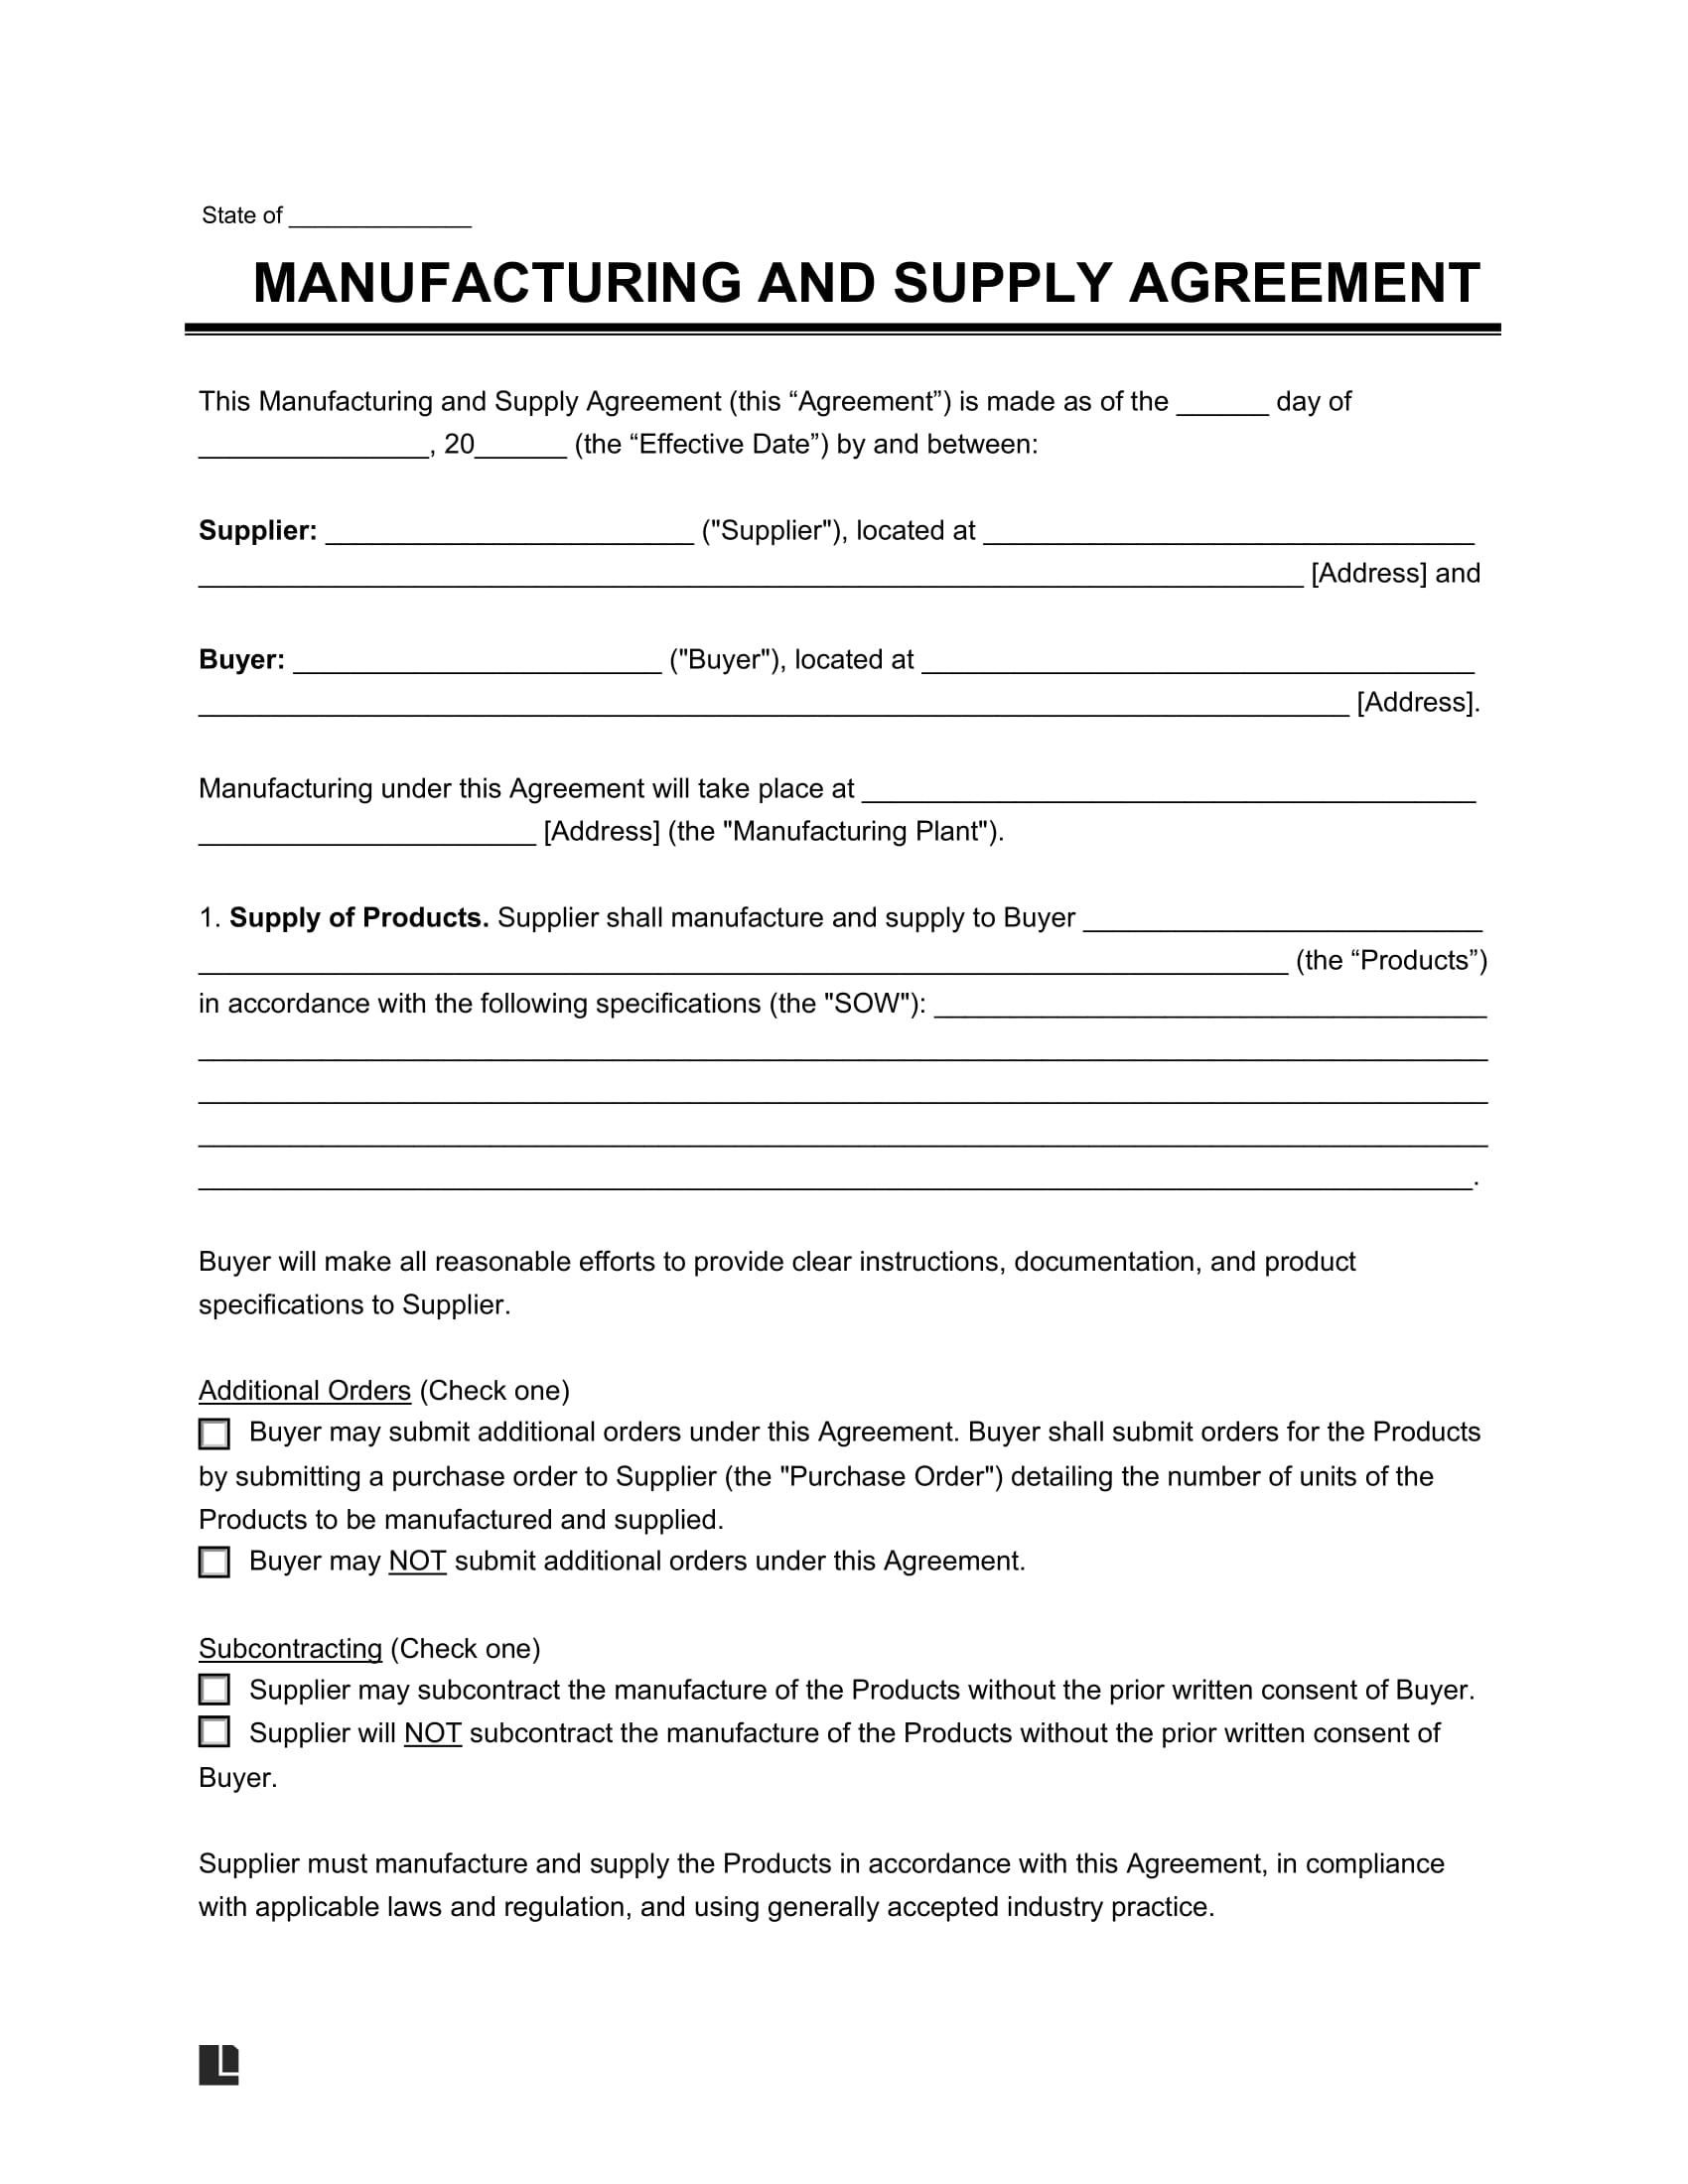 Manufacturing and supply agreement screenshot